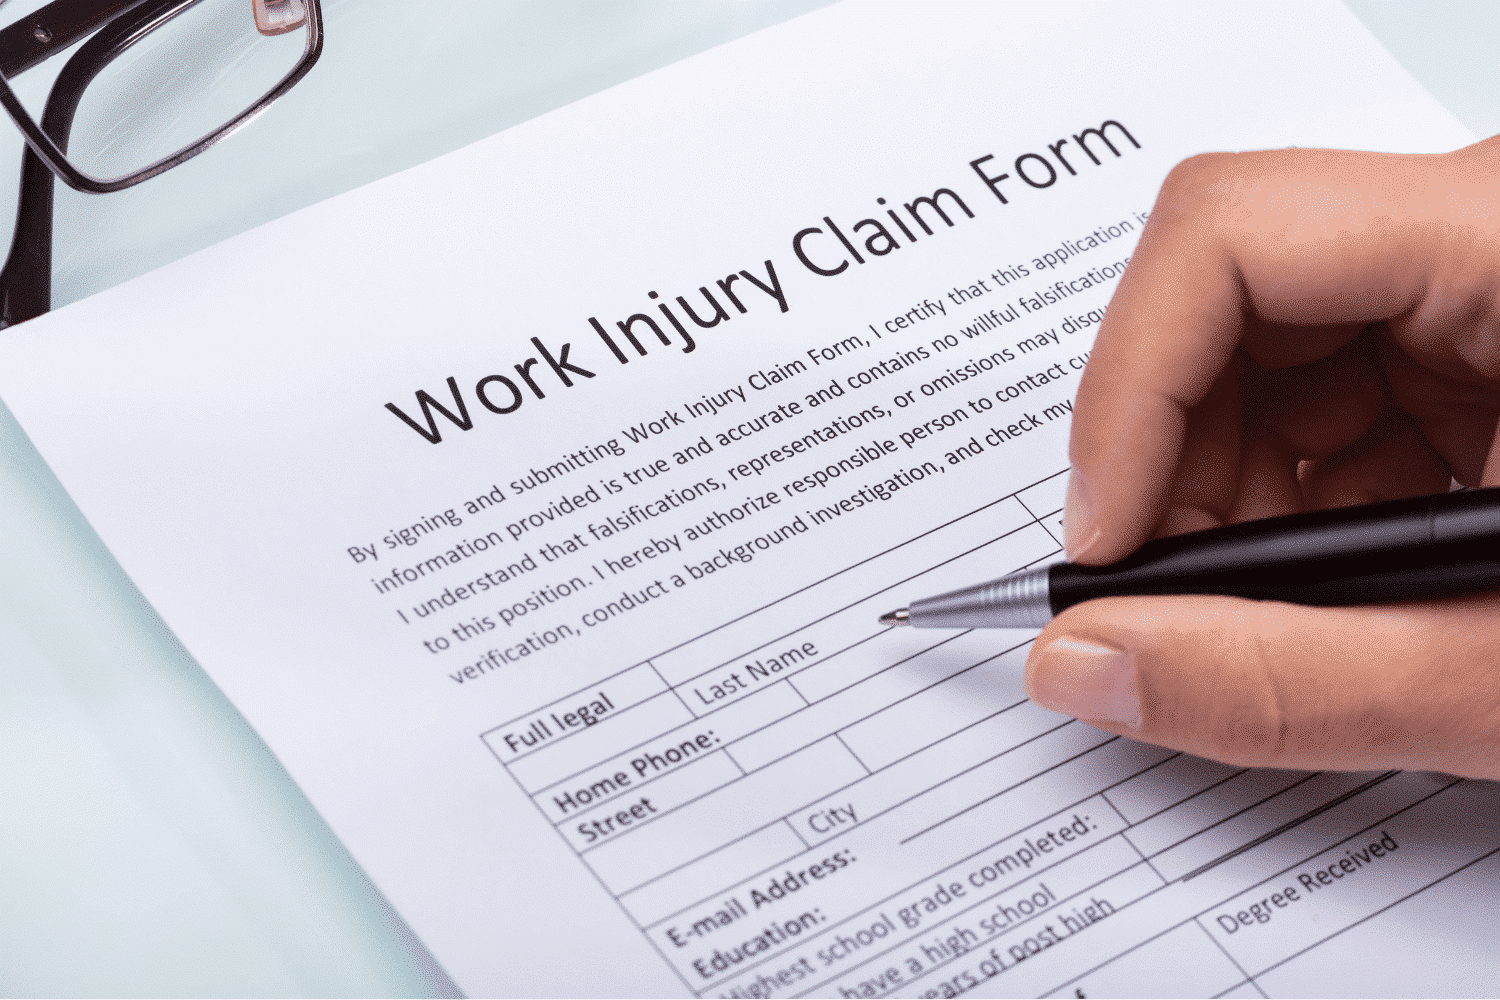 doctors who accepet workers comp insurance in new york